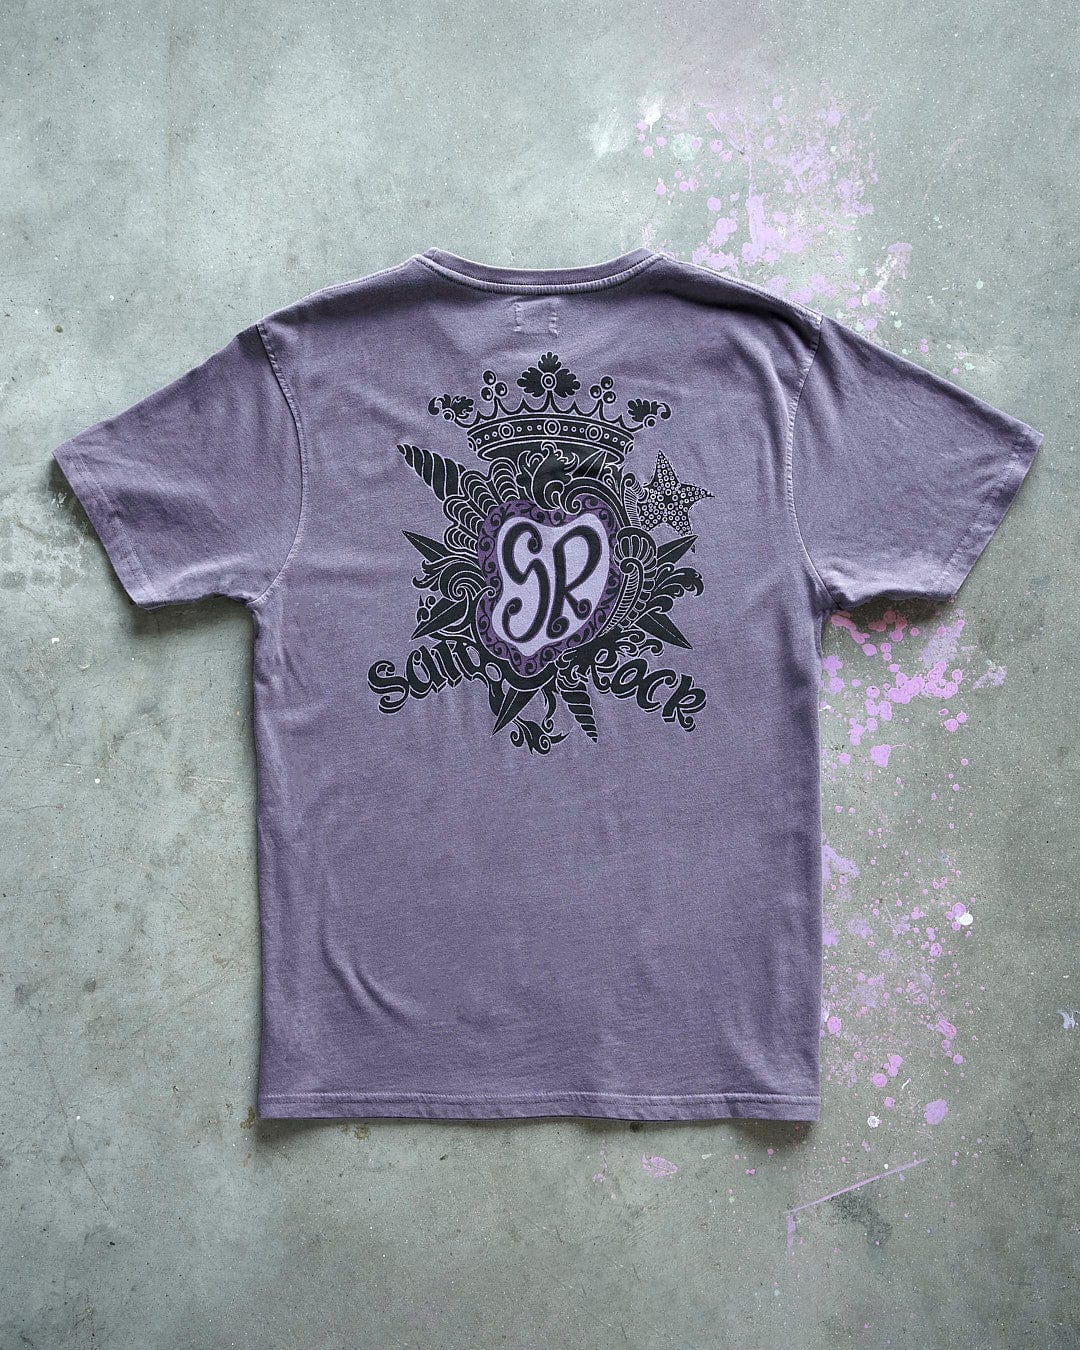 A Saltrock - Tribal Saltrock - Limited Edition 35 Years T-Shirt with a skull and crossbones on it.